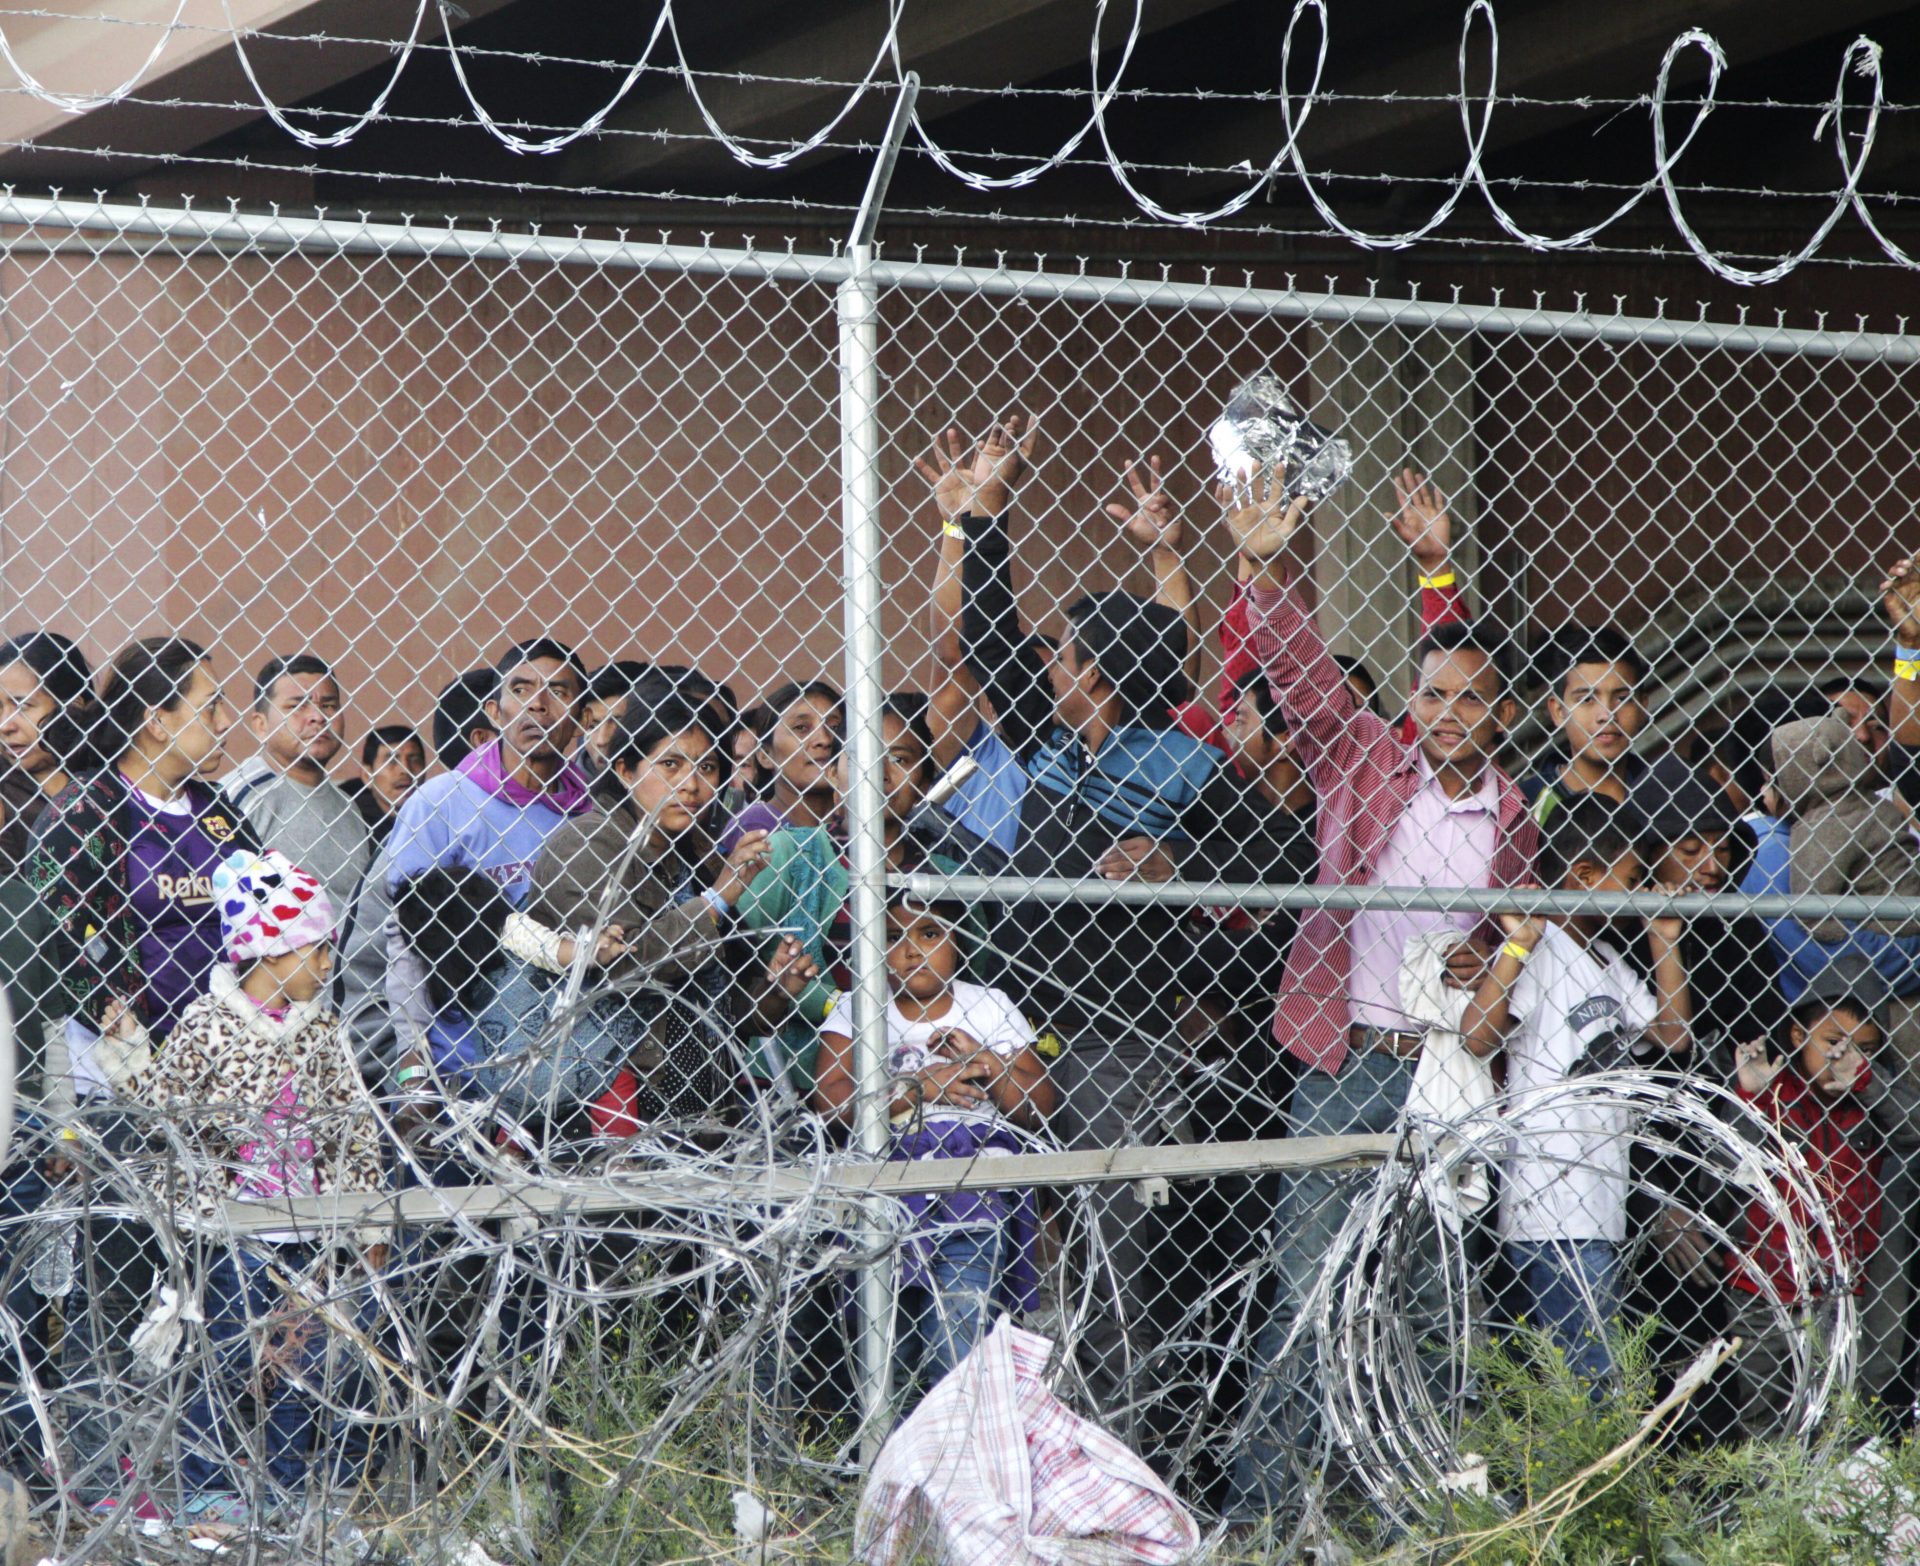 n this March 27, 2019, file photo, Central American migrants wait for food in a pen erected by U.S. Customs and Border Protection to process a surge of migrant families and unaccompanied minors in El Paso, Texas. Texas Gov. Greg Abbott says he's sending another 1,000 National Guard troops to the U.S.-Mexico border and blasted Congress as a "group of reprobates" over the growing humanitarian crisis. Abbott said Friday, June 21, 2019, that the additional Guard members will assist at detention facilities and at ports of entry.